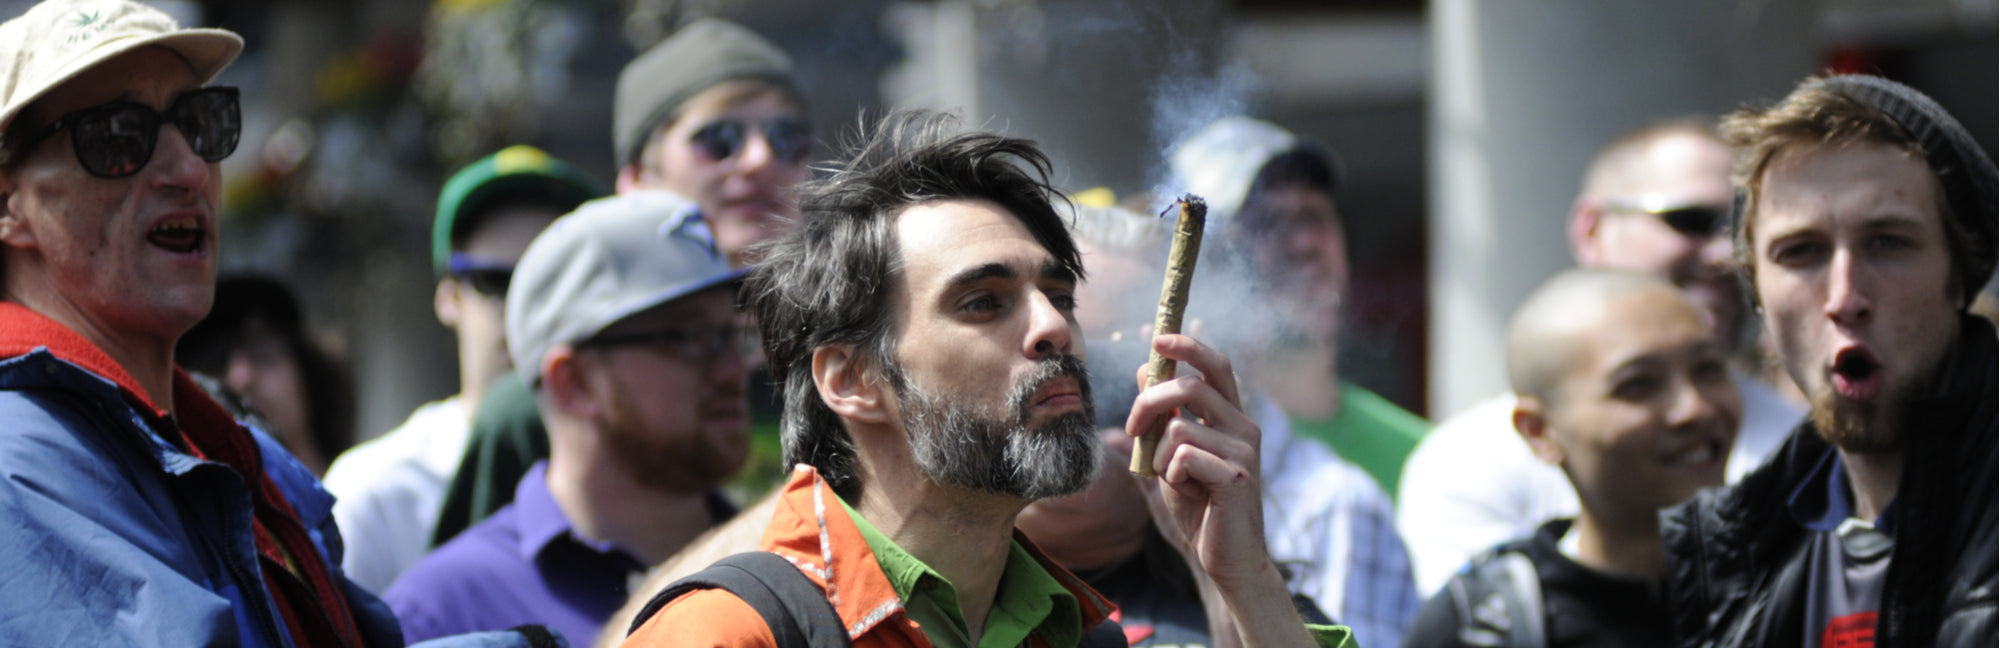 Colorado is Thriving From its Legalization Efforts